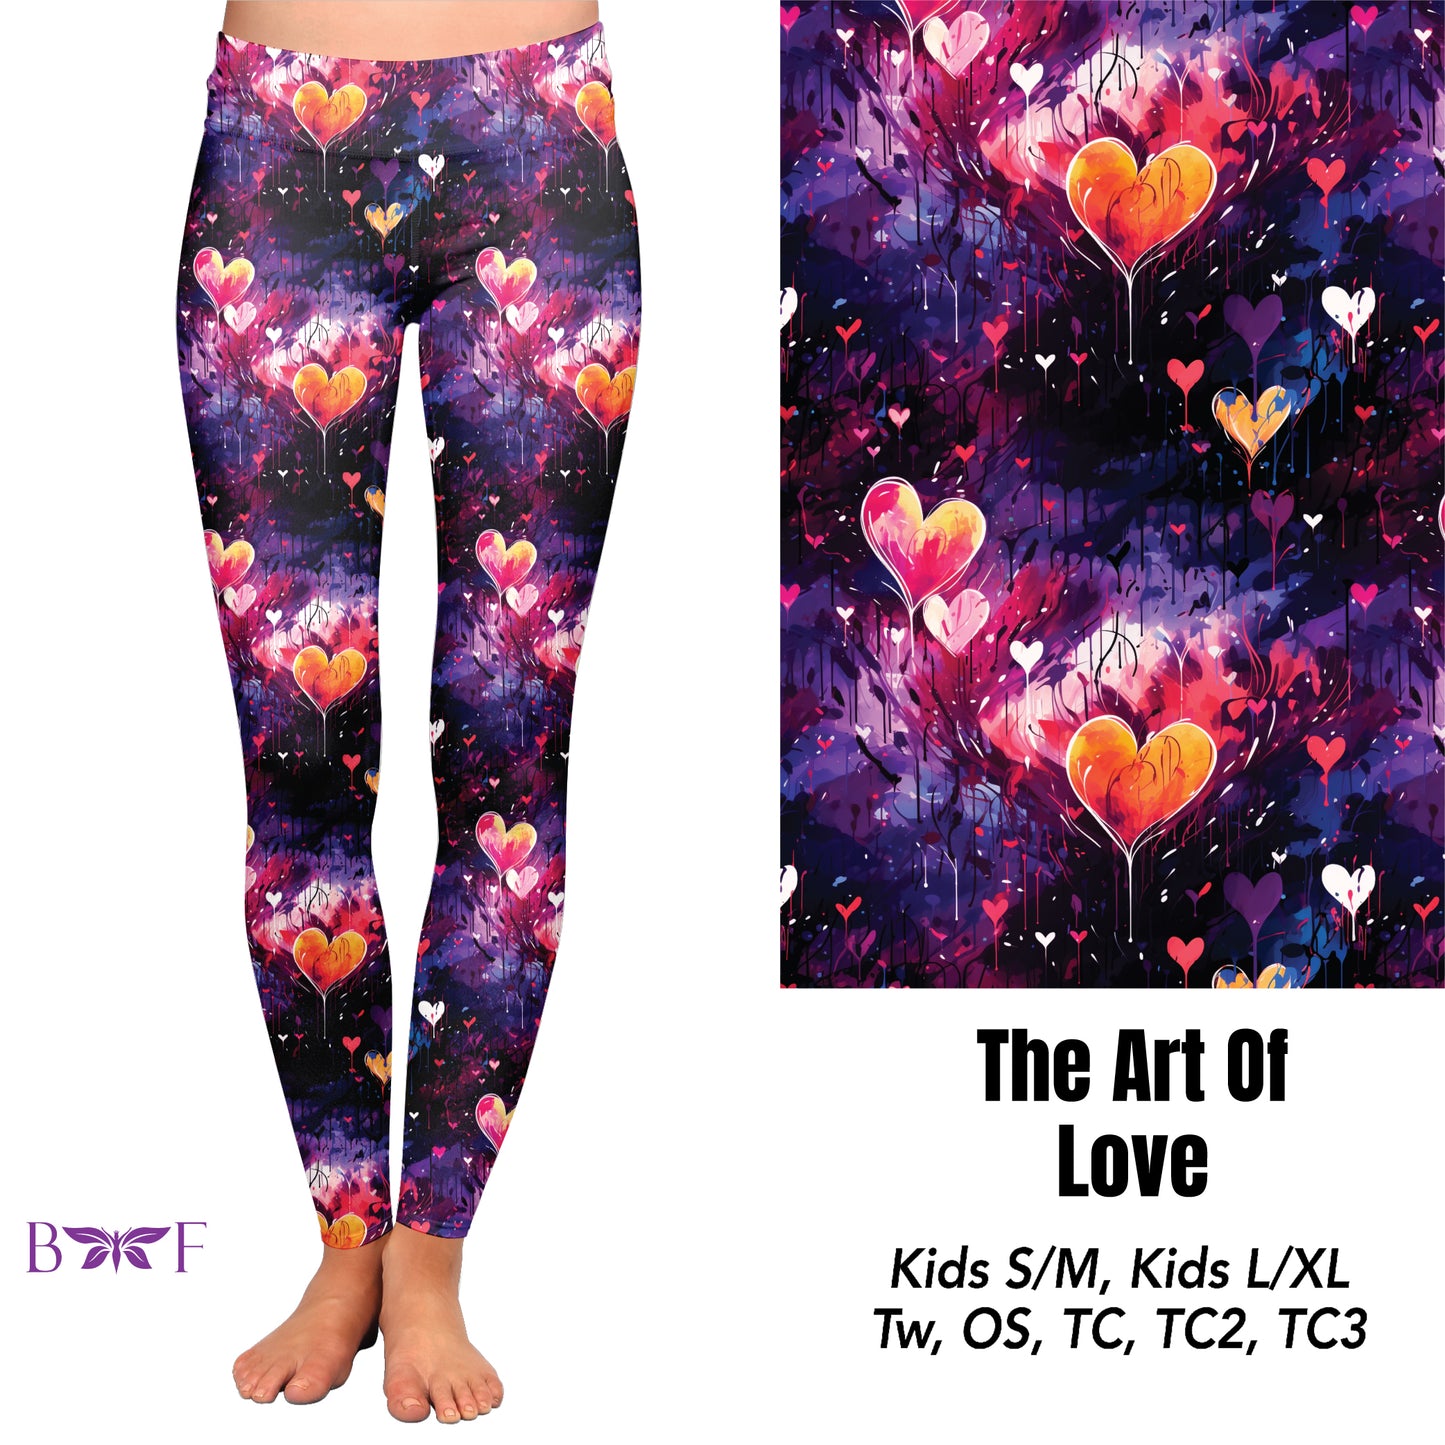 The art of love leggings with pockets